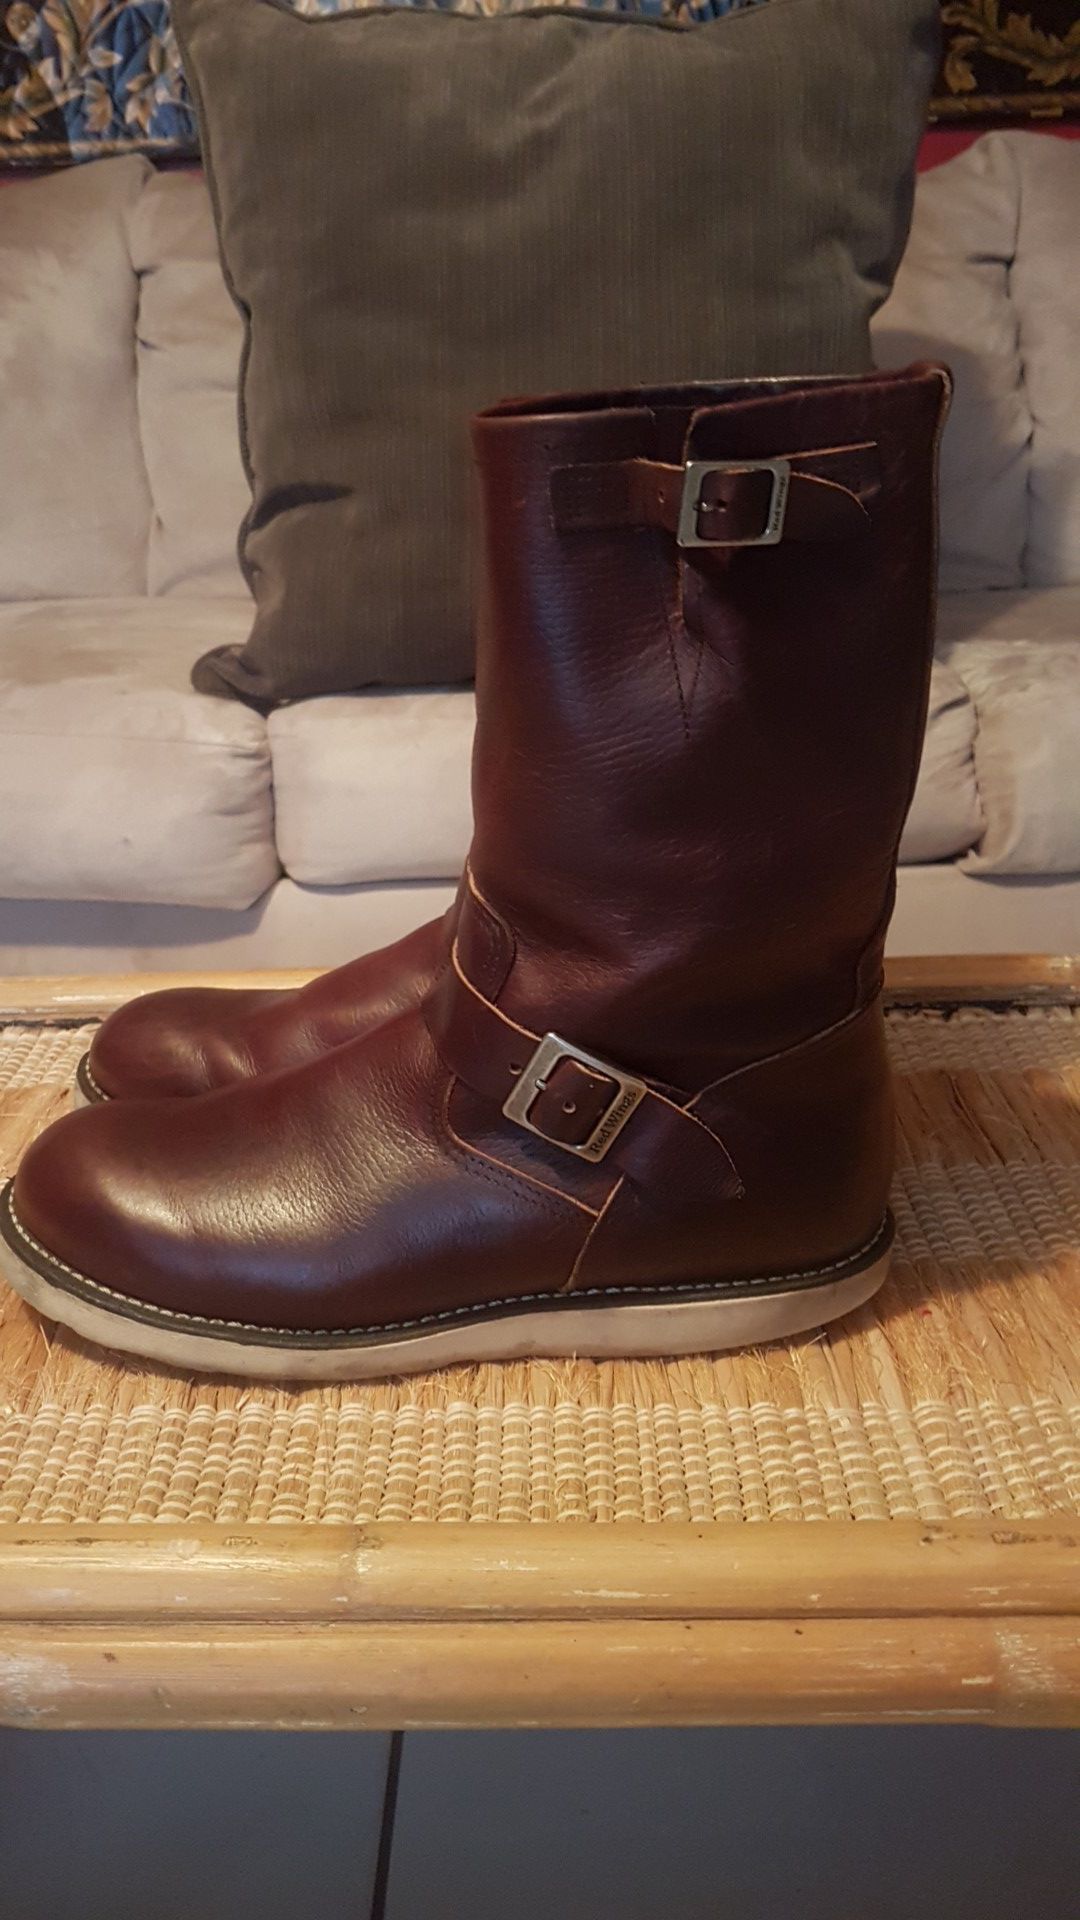 RED WING BIKER BOOTS SIZE 11 1/2 D